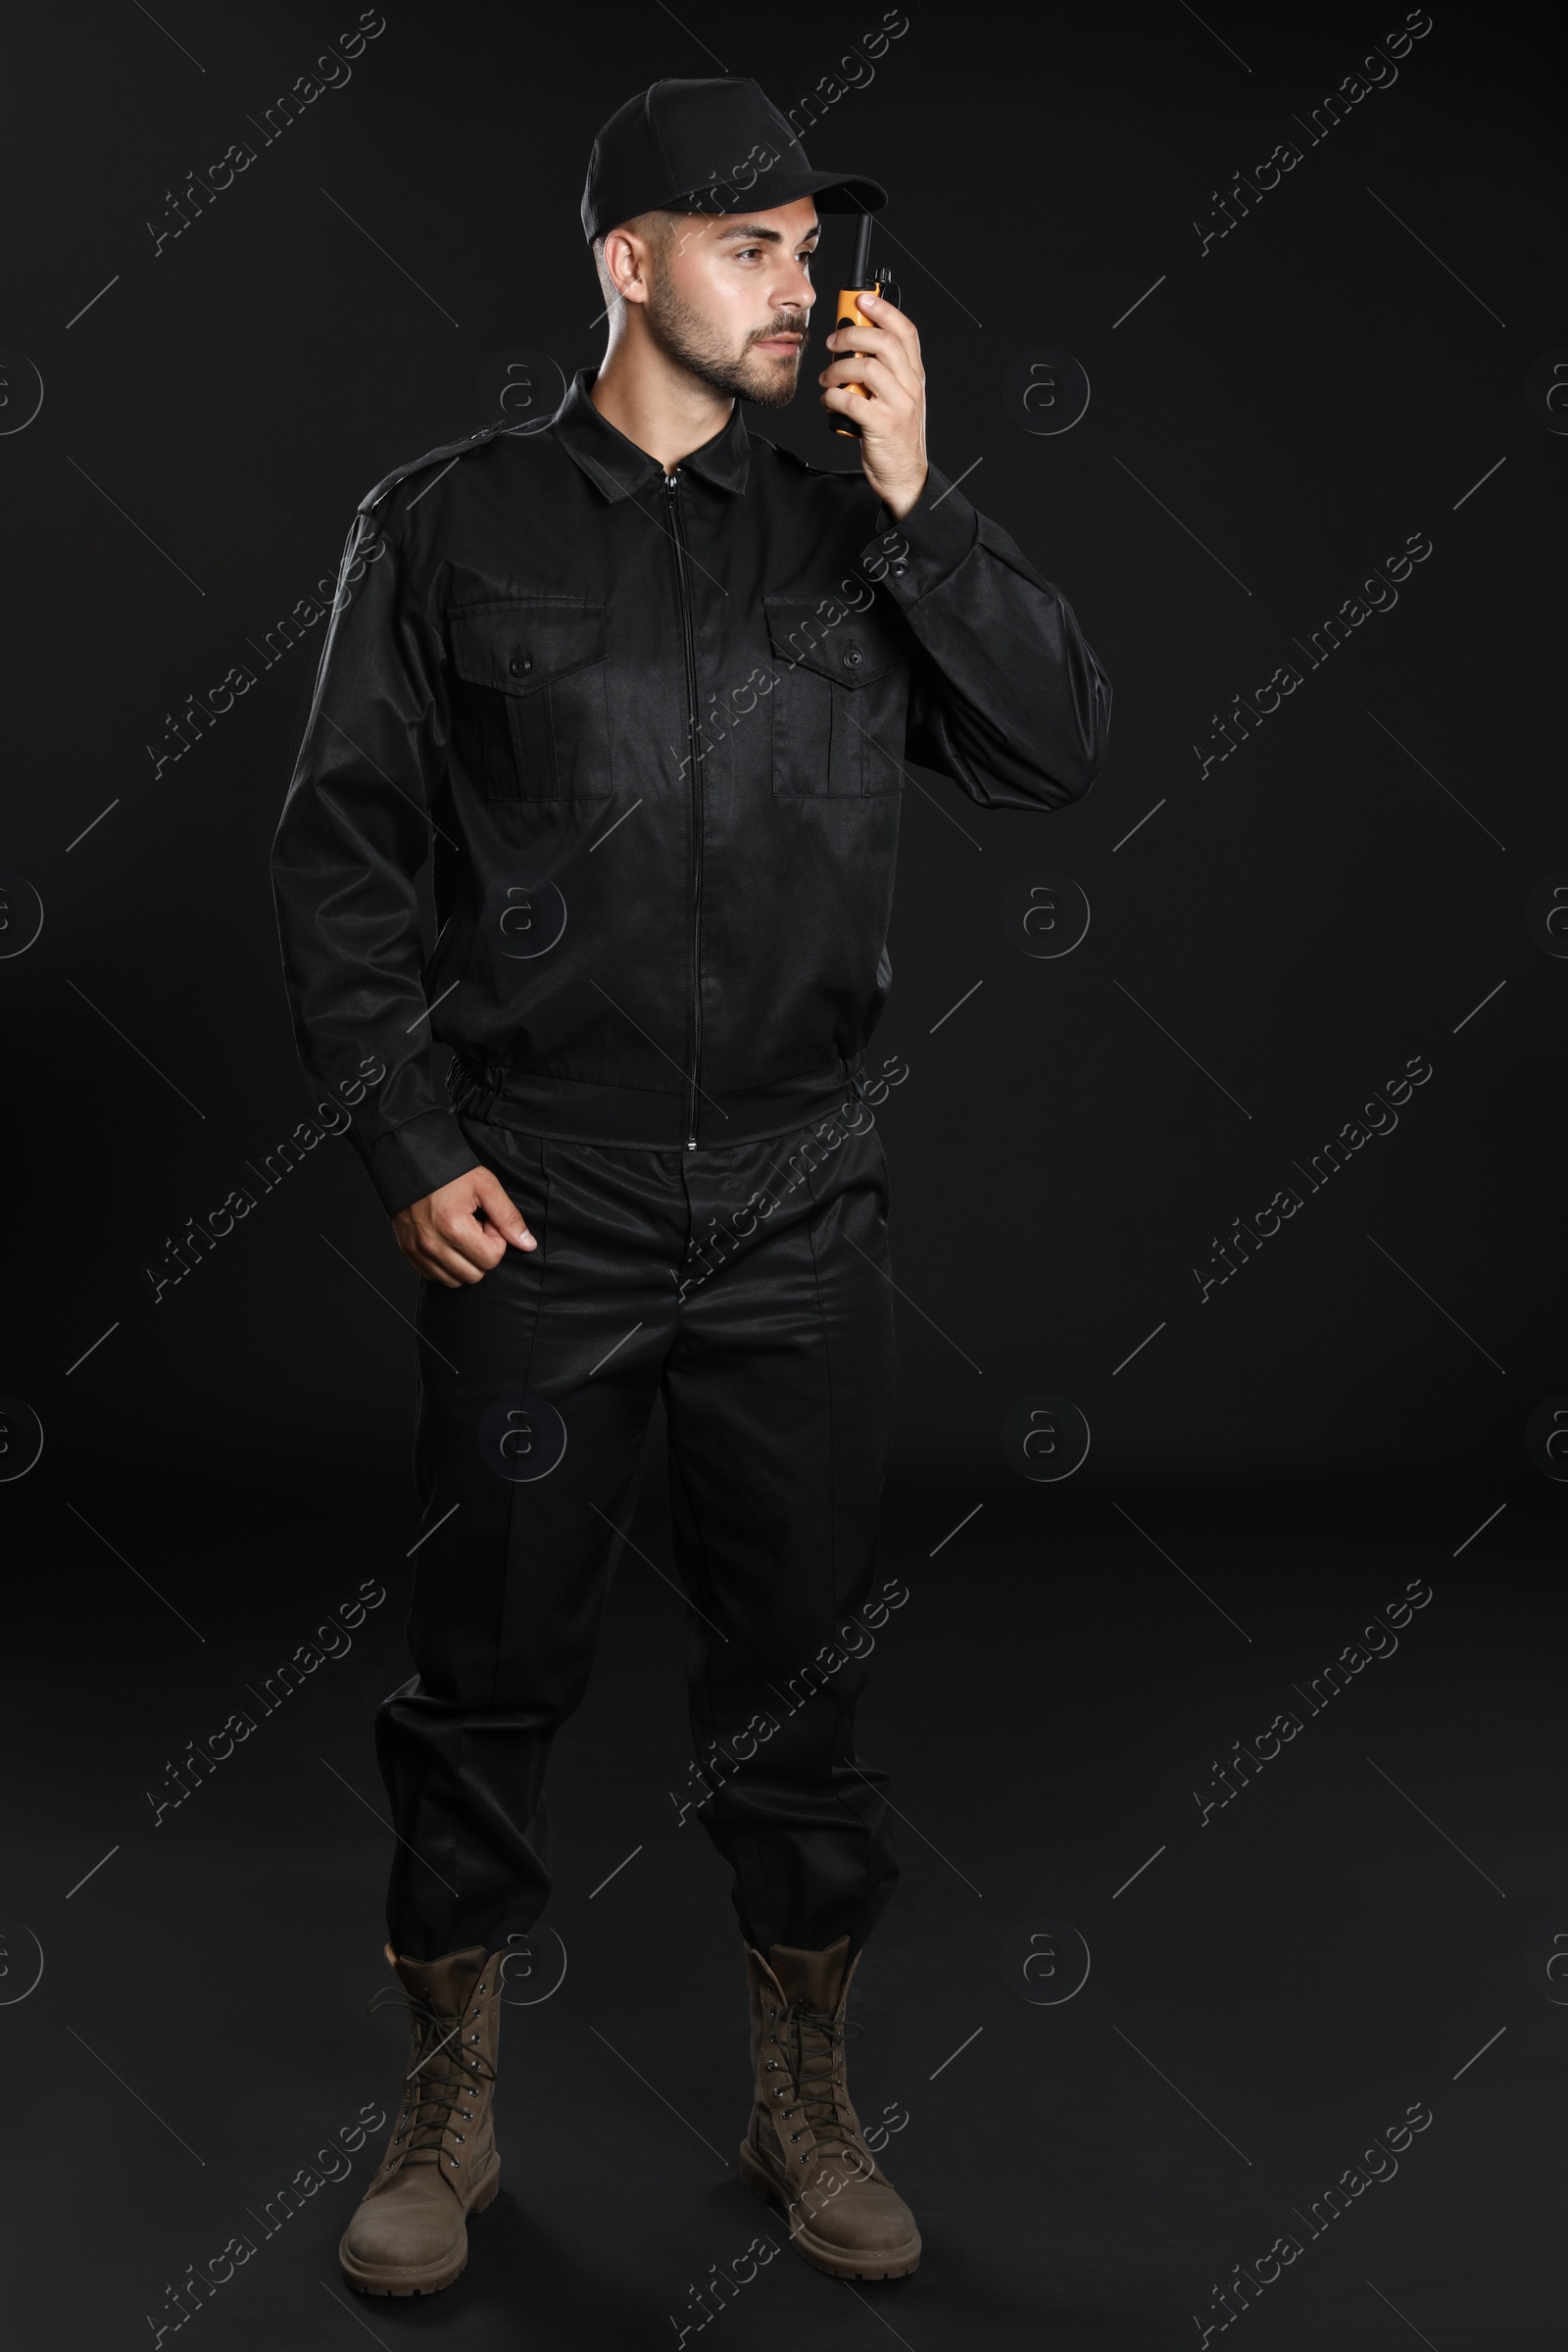 Photo of Male security guard in uniform using portable radio transmitter on dark background